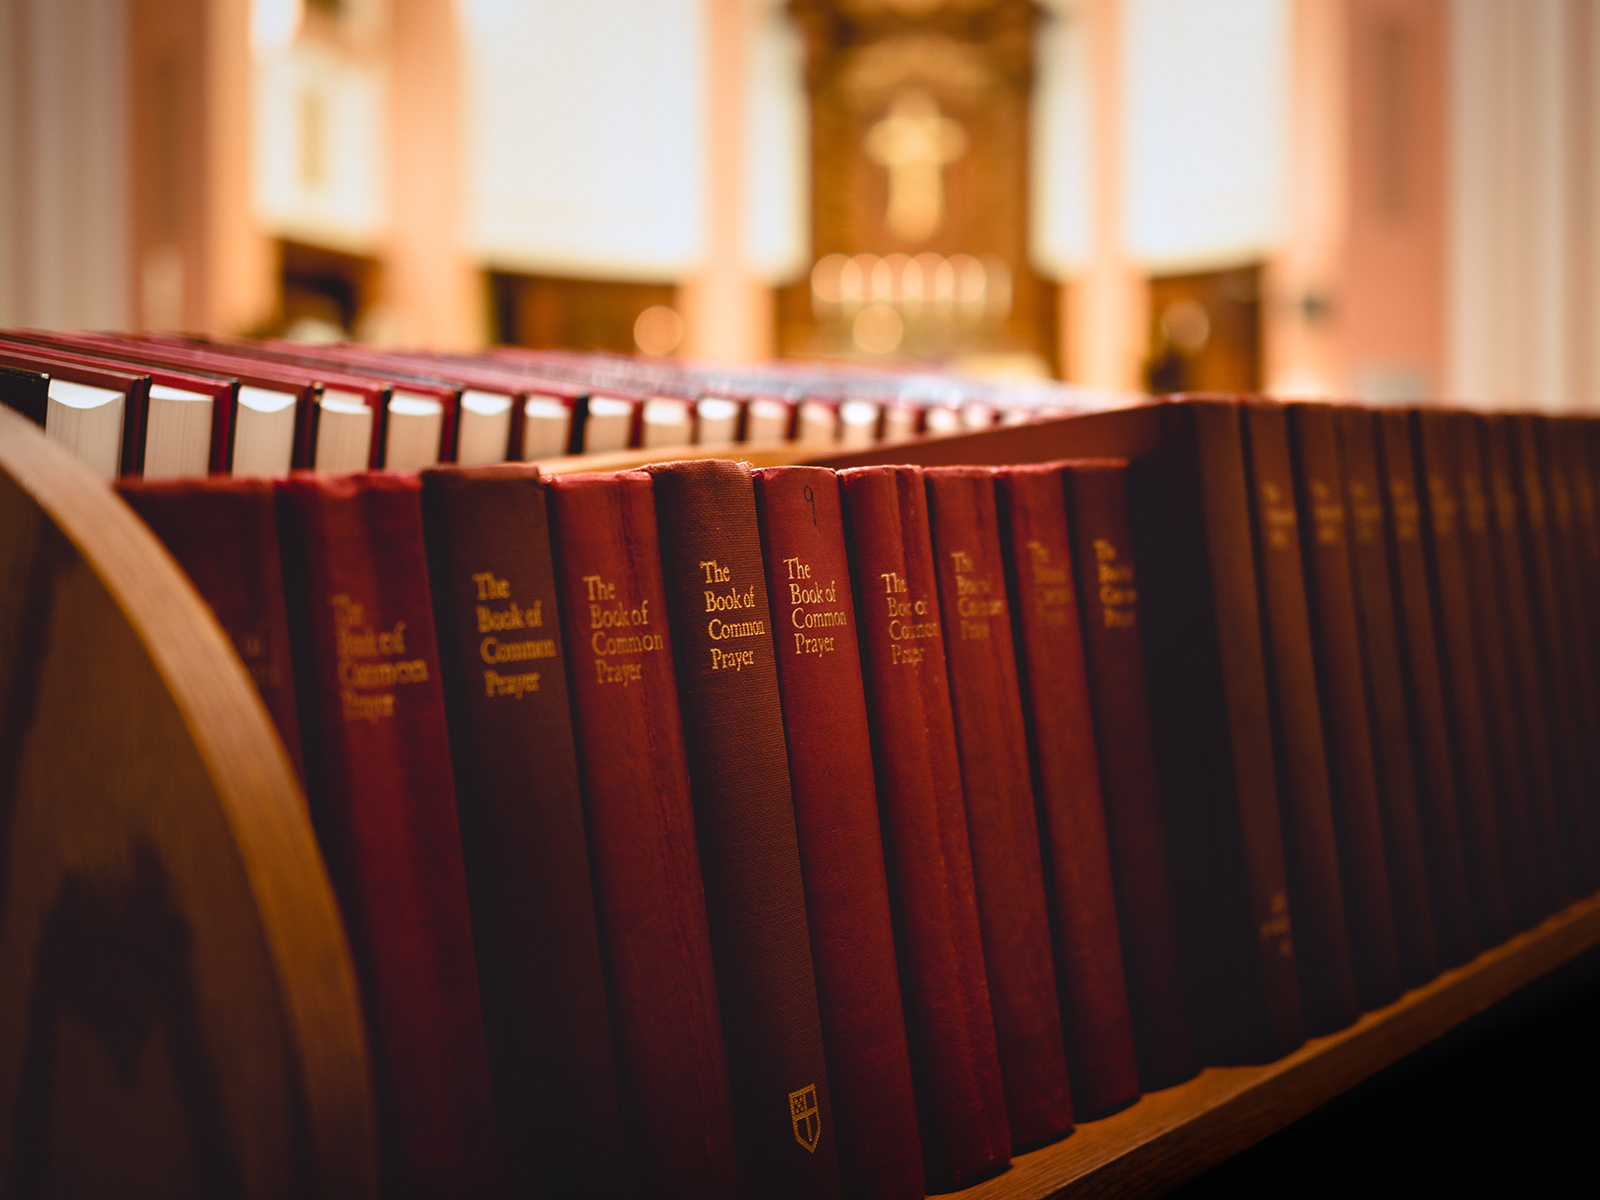 Volumes of the Episcopal Church's Book of Common Prayer. Photo by Kentaro Toma/Unsplash/Creative Commons